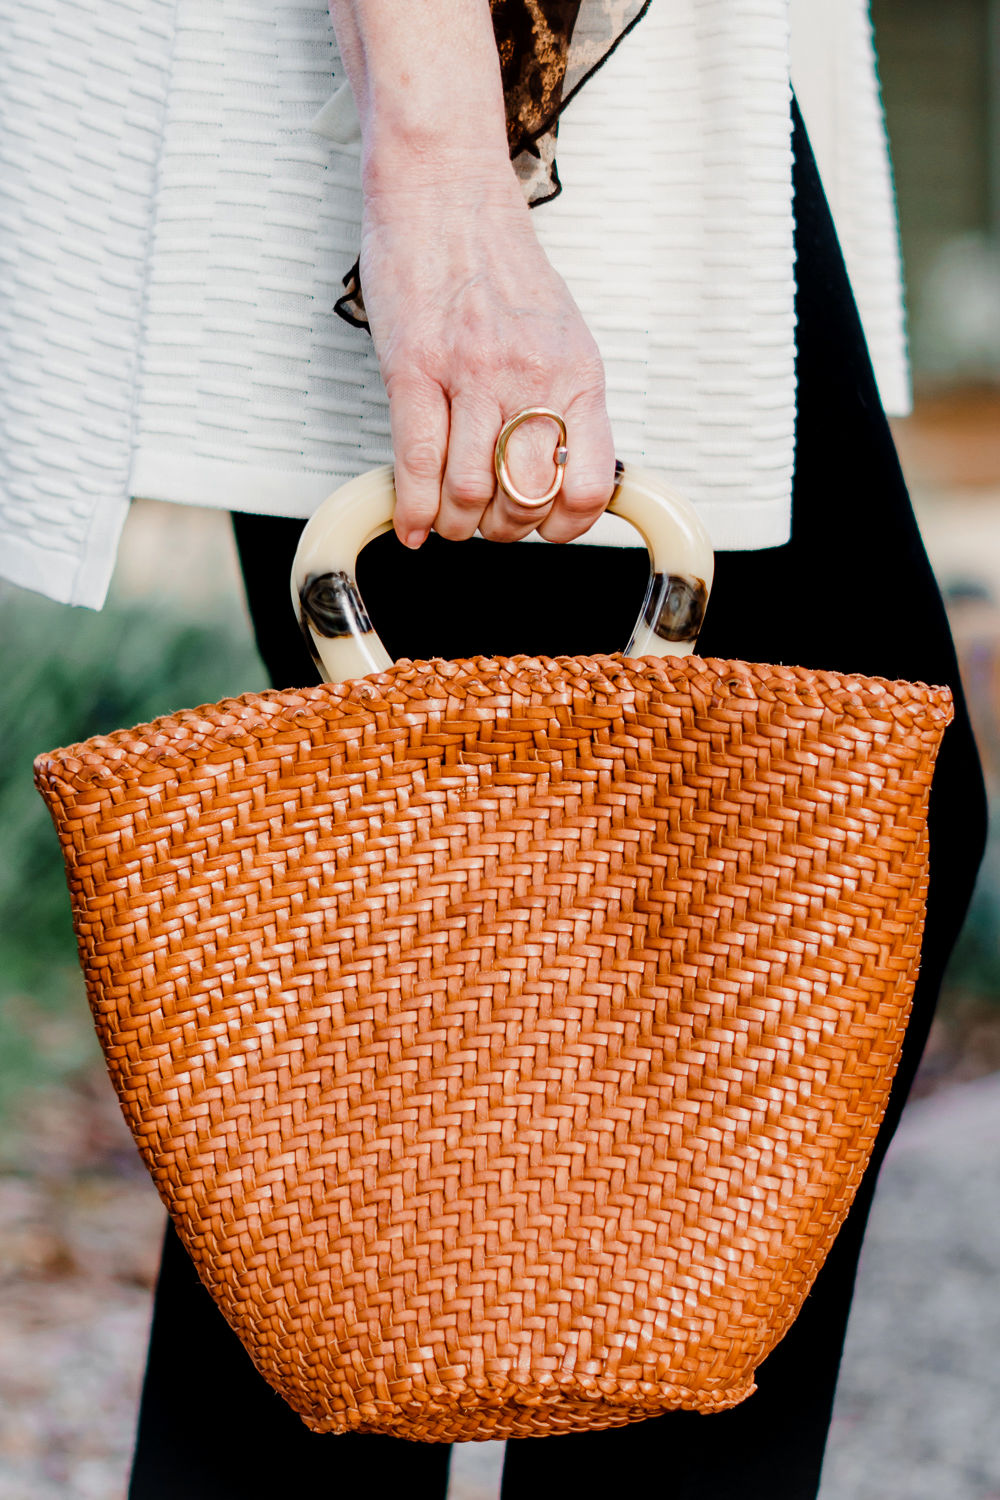 Detail: Susan B. wears a Charlotte Chesnais ring and carries a Loeffler Randall woven tote. Info at une femme d'un certain age.